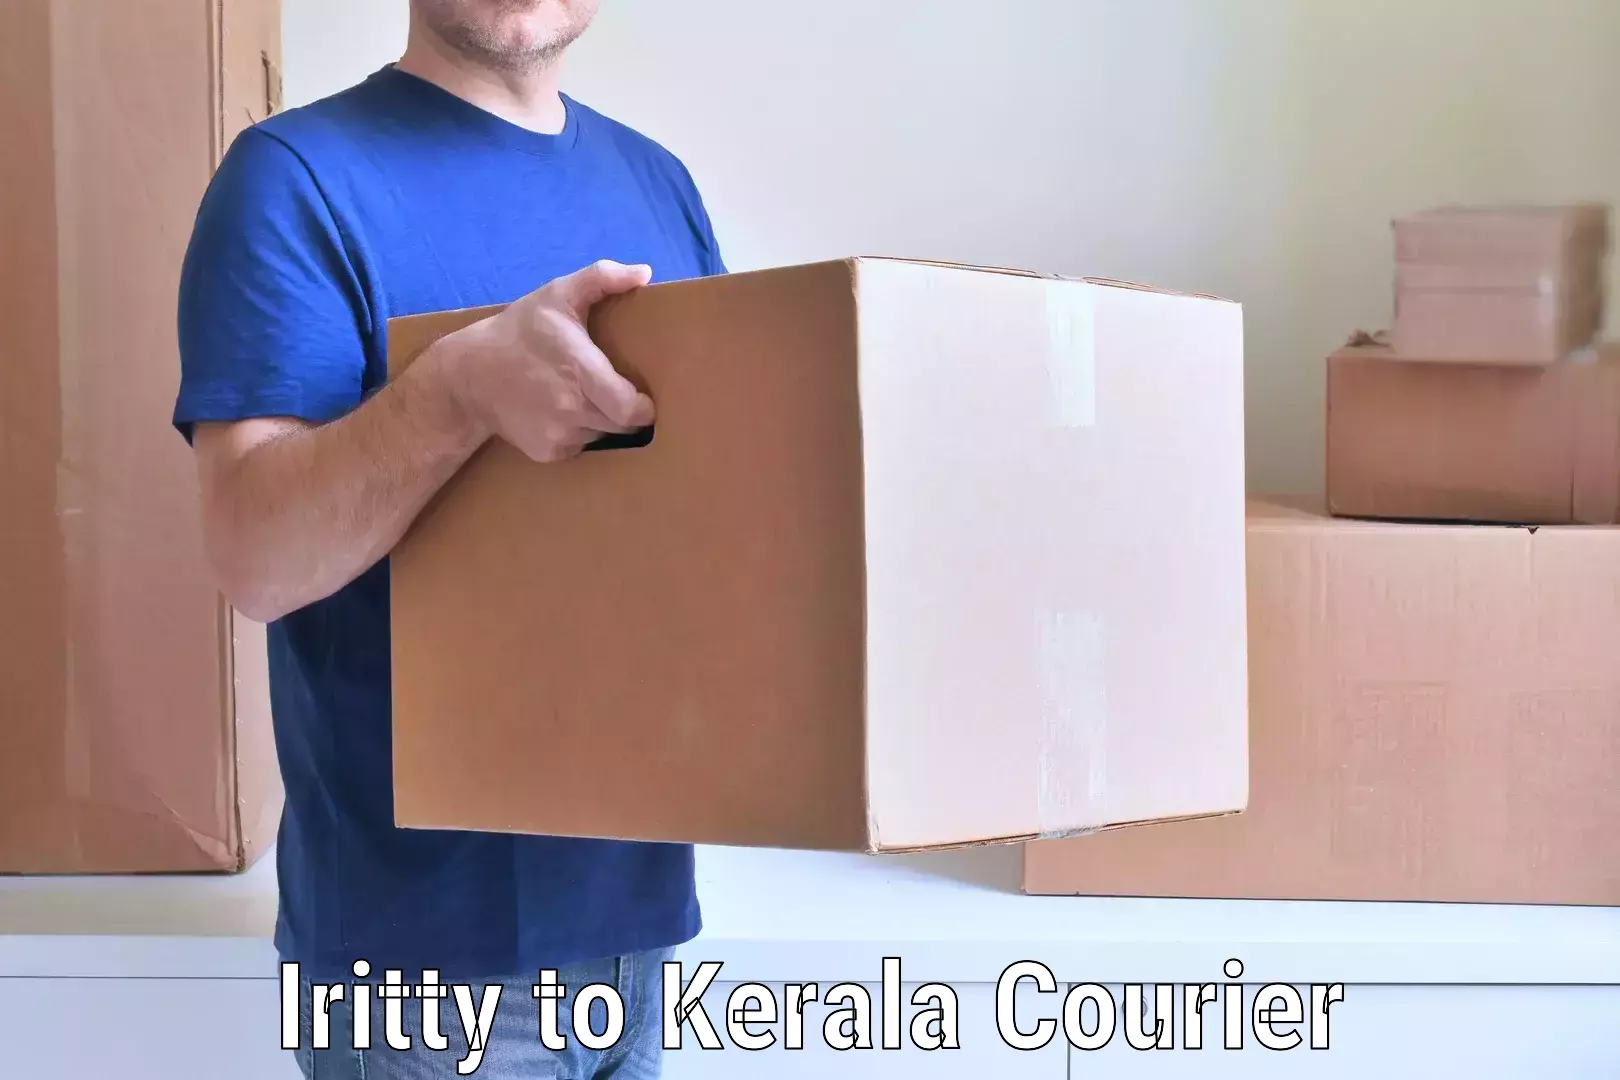 Moving and packing experts Iritty to Kerala